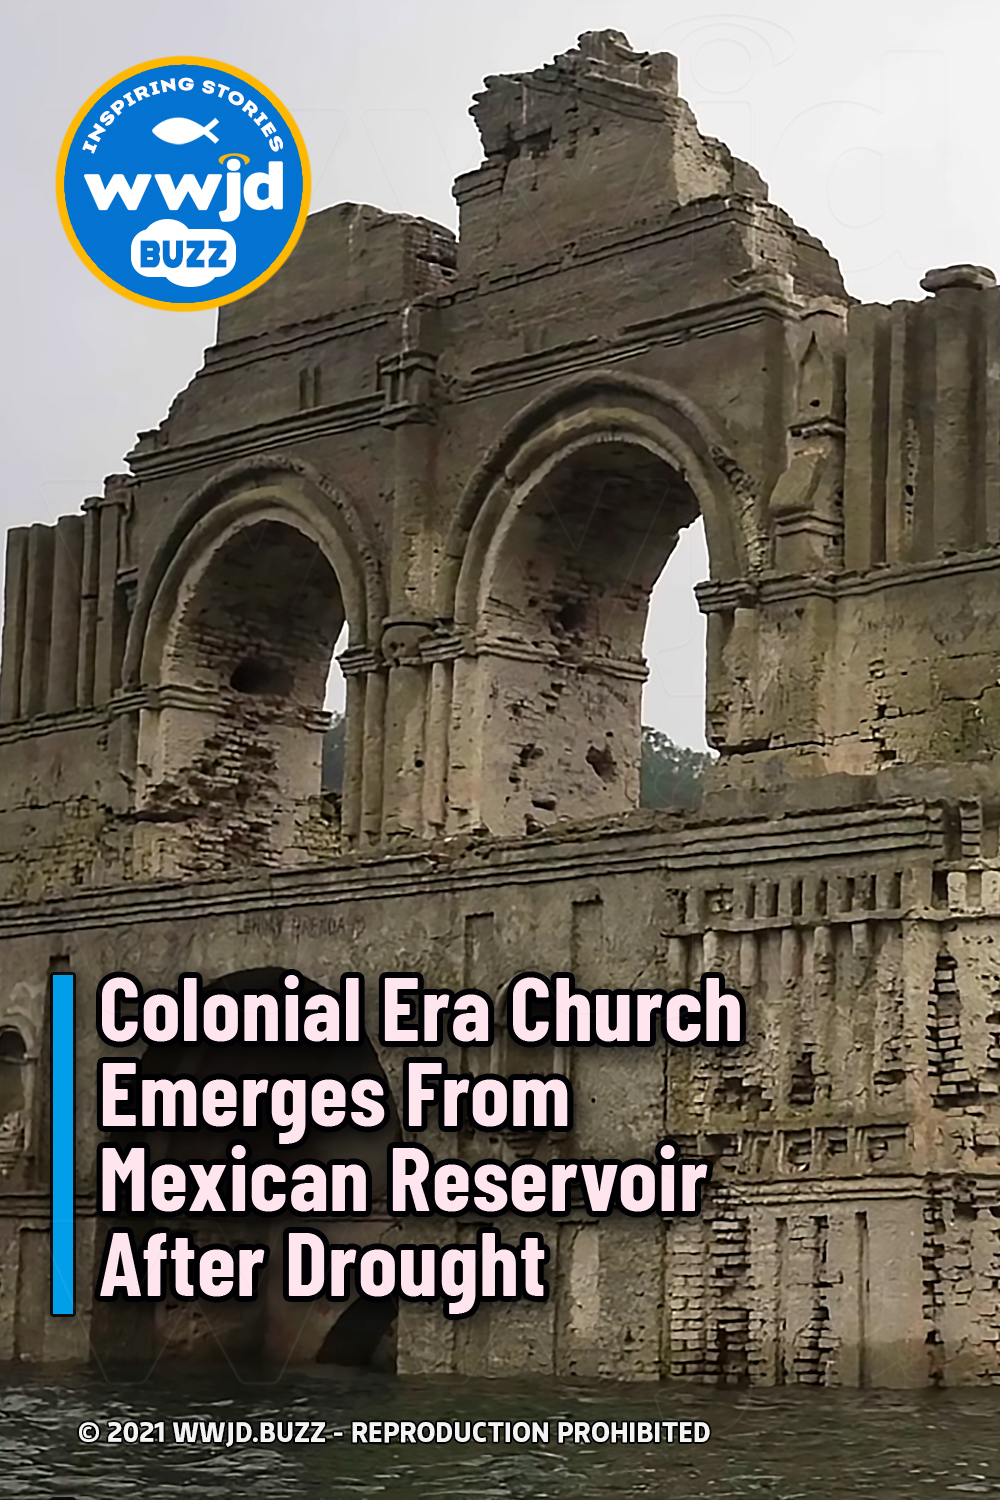 Colonial Era Church Emerges From Mexican Reservoir After Drought